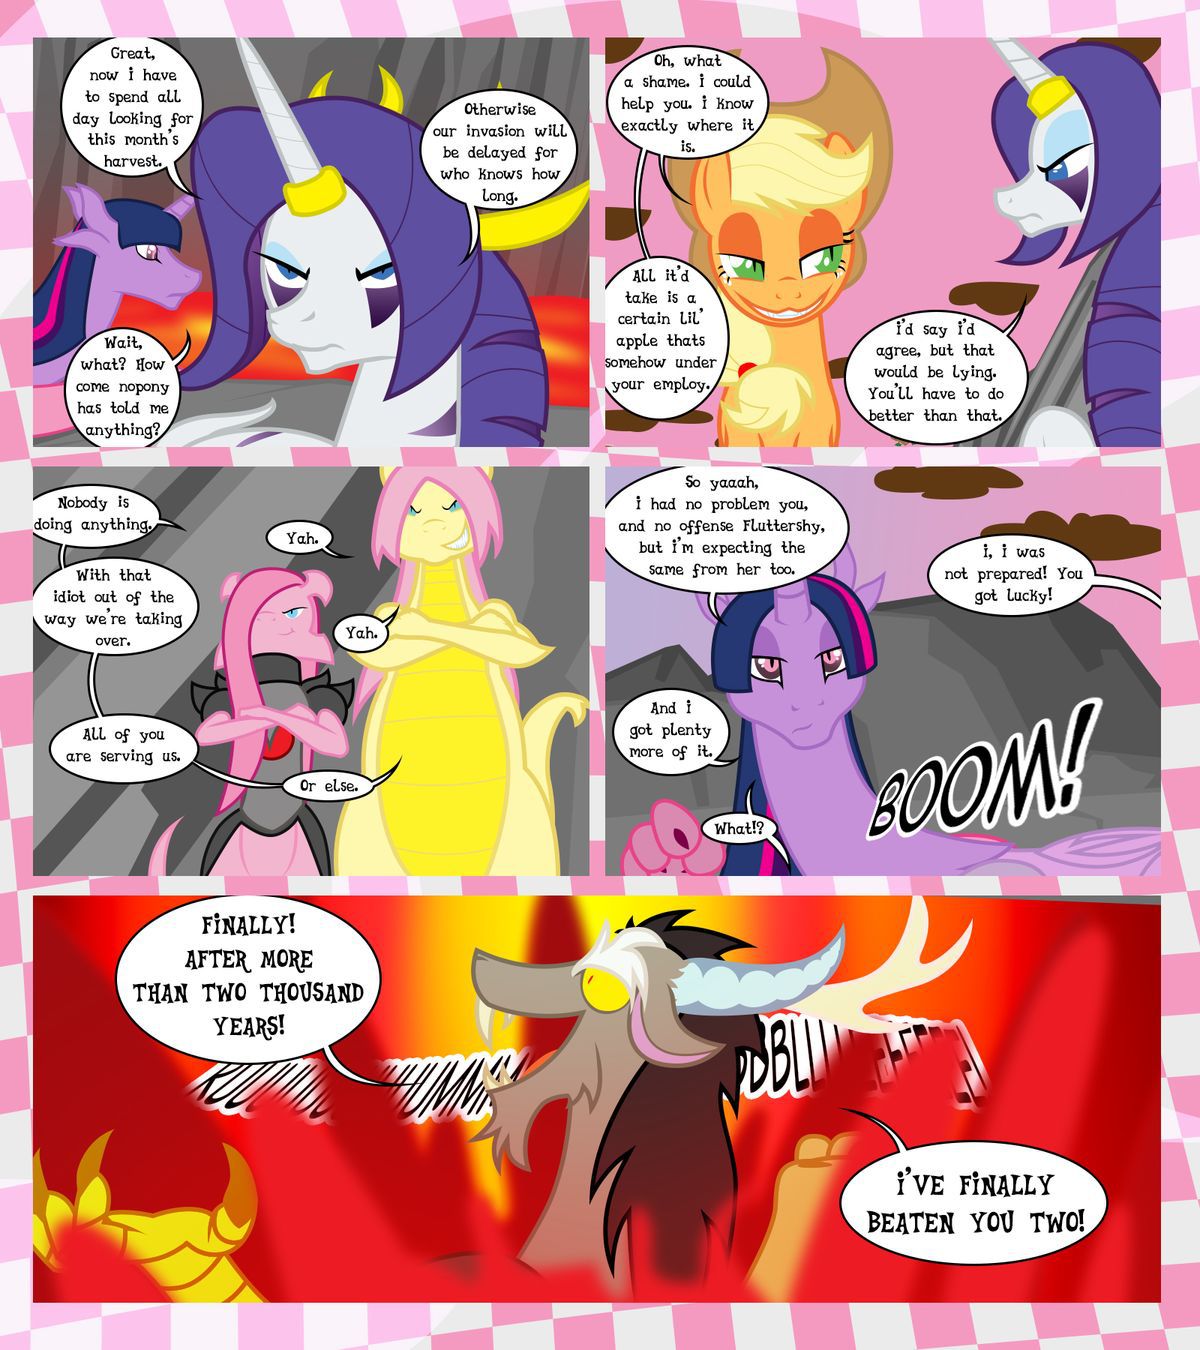 [GatesMcCloud] Cutie Mark Crusaders 10k: Chapter 3 - The Lost (My Little Pony: Friendship is Magic) [English] [Ongoing] 19